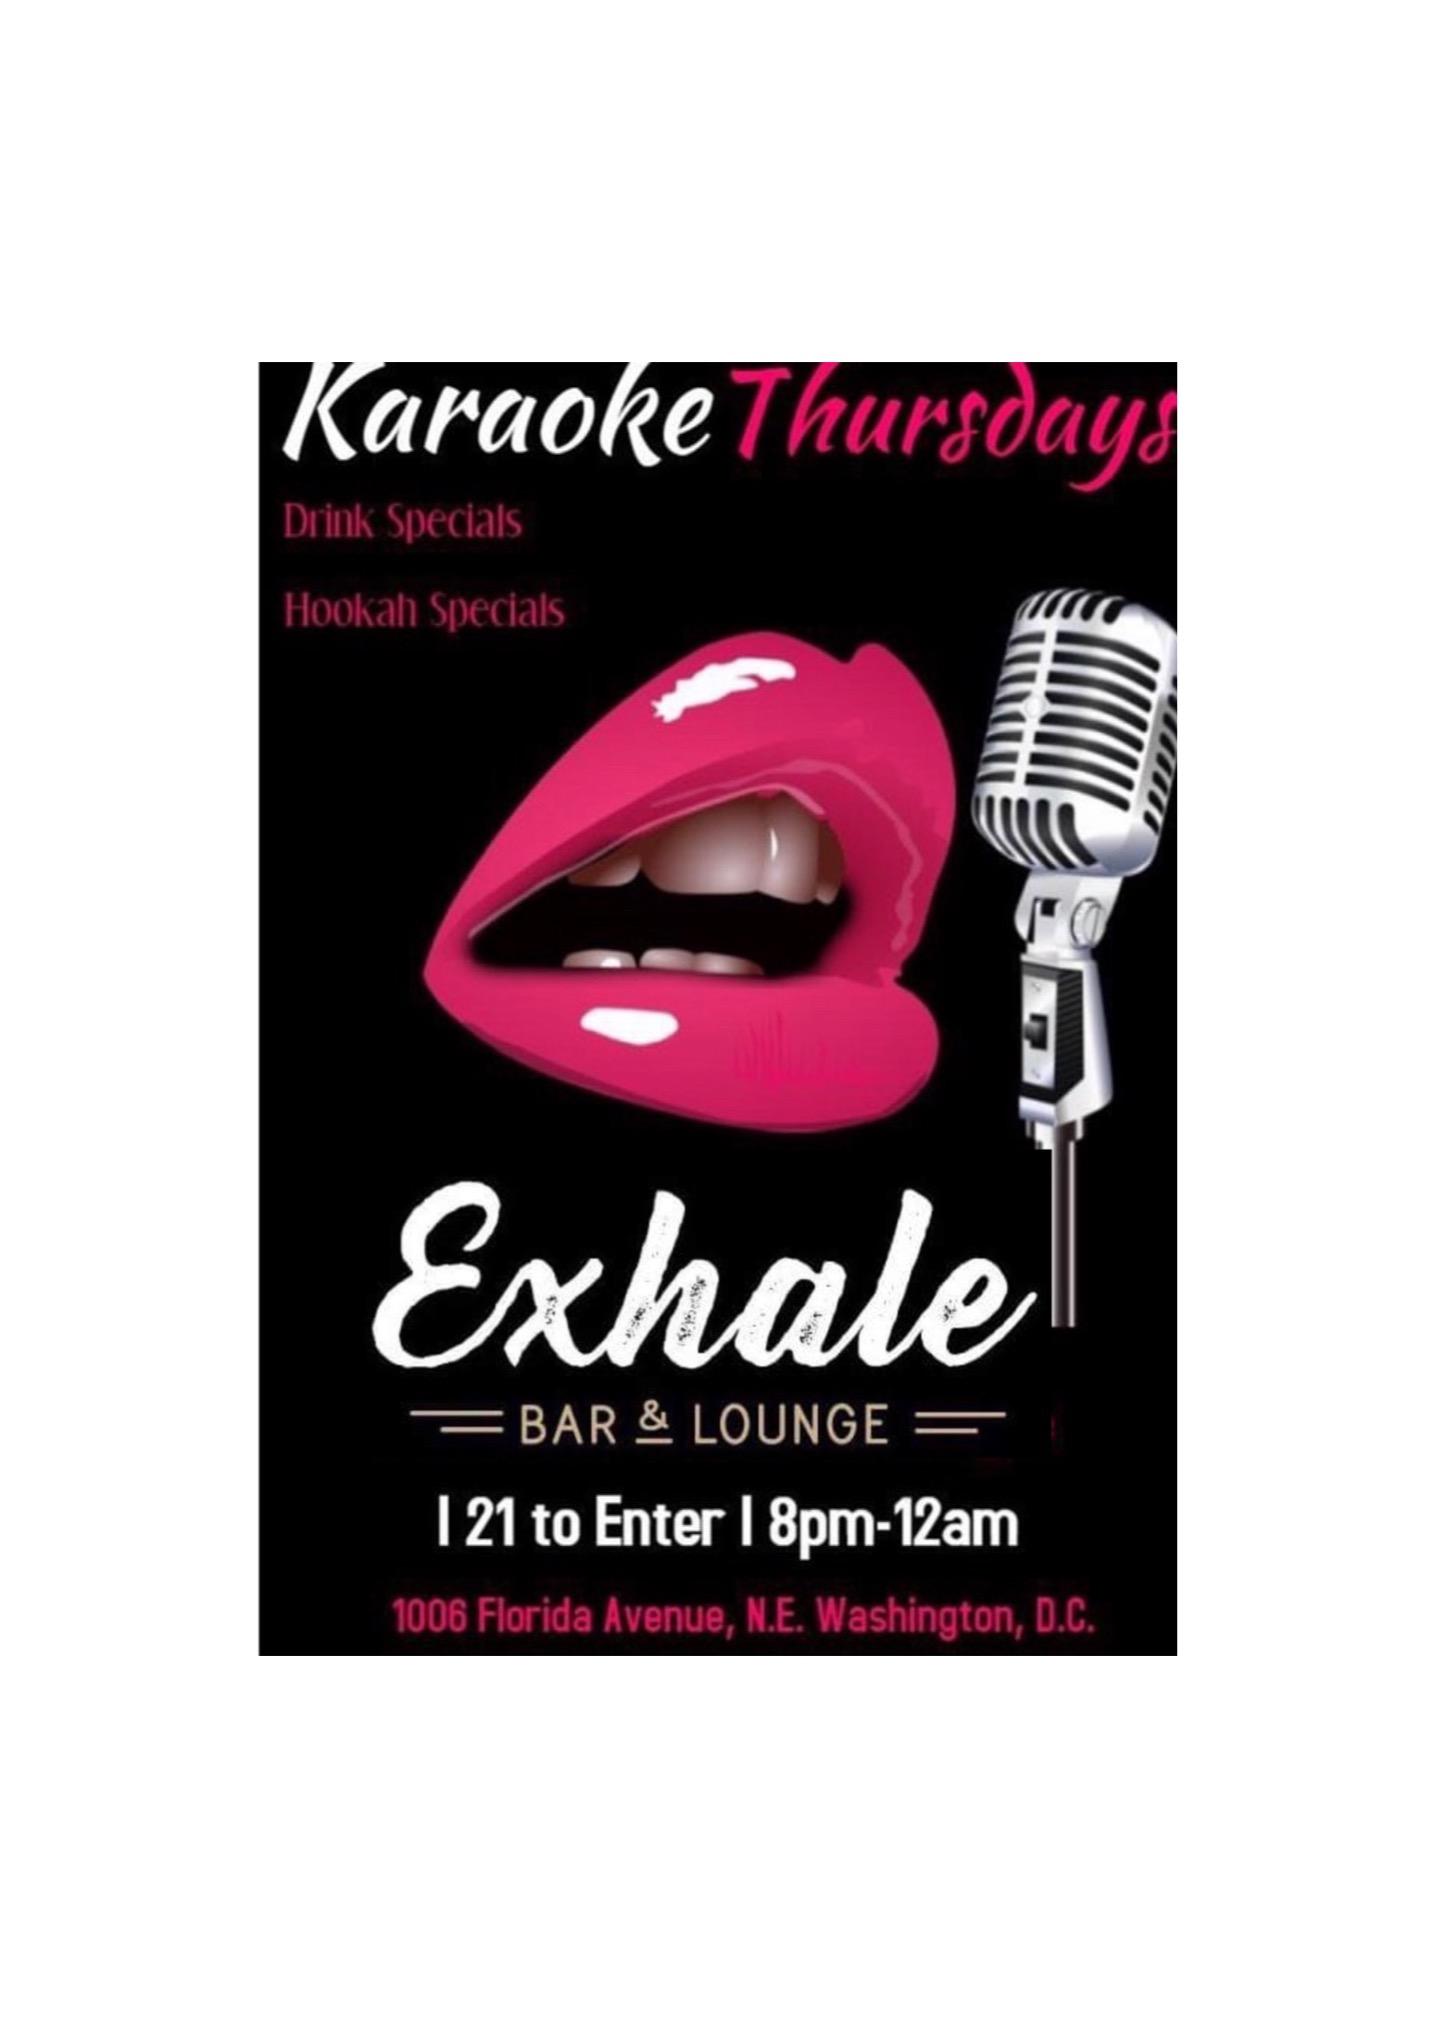 Karaoke Thursday's at Exhale Bar and Lounge